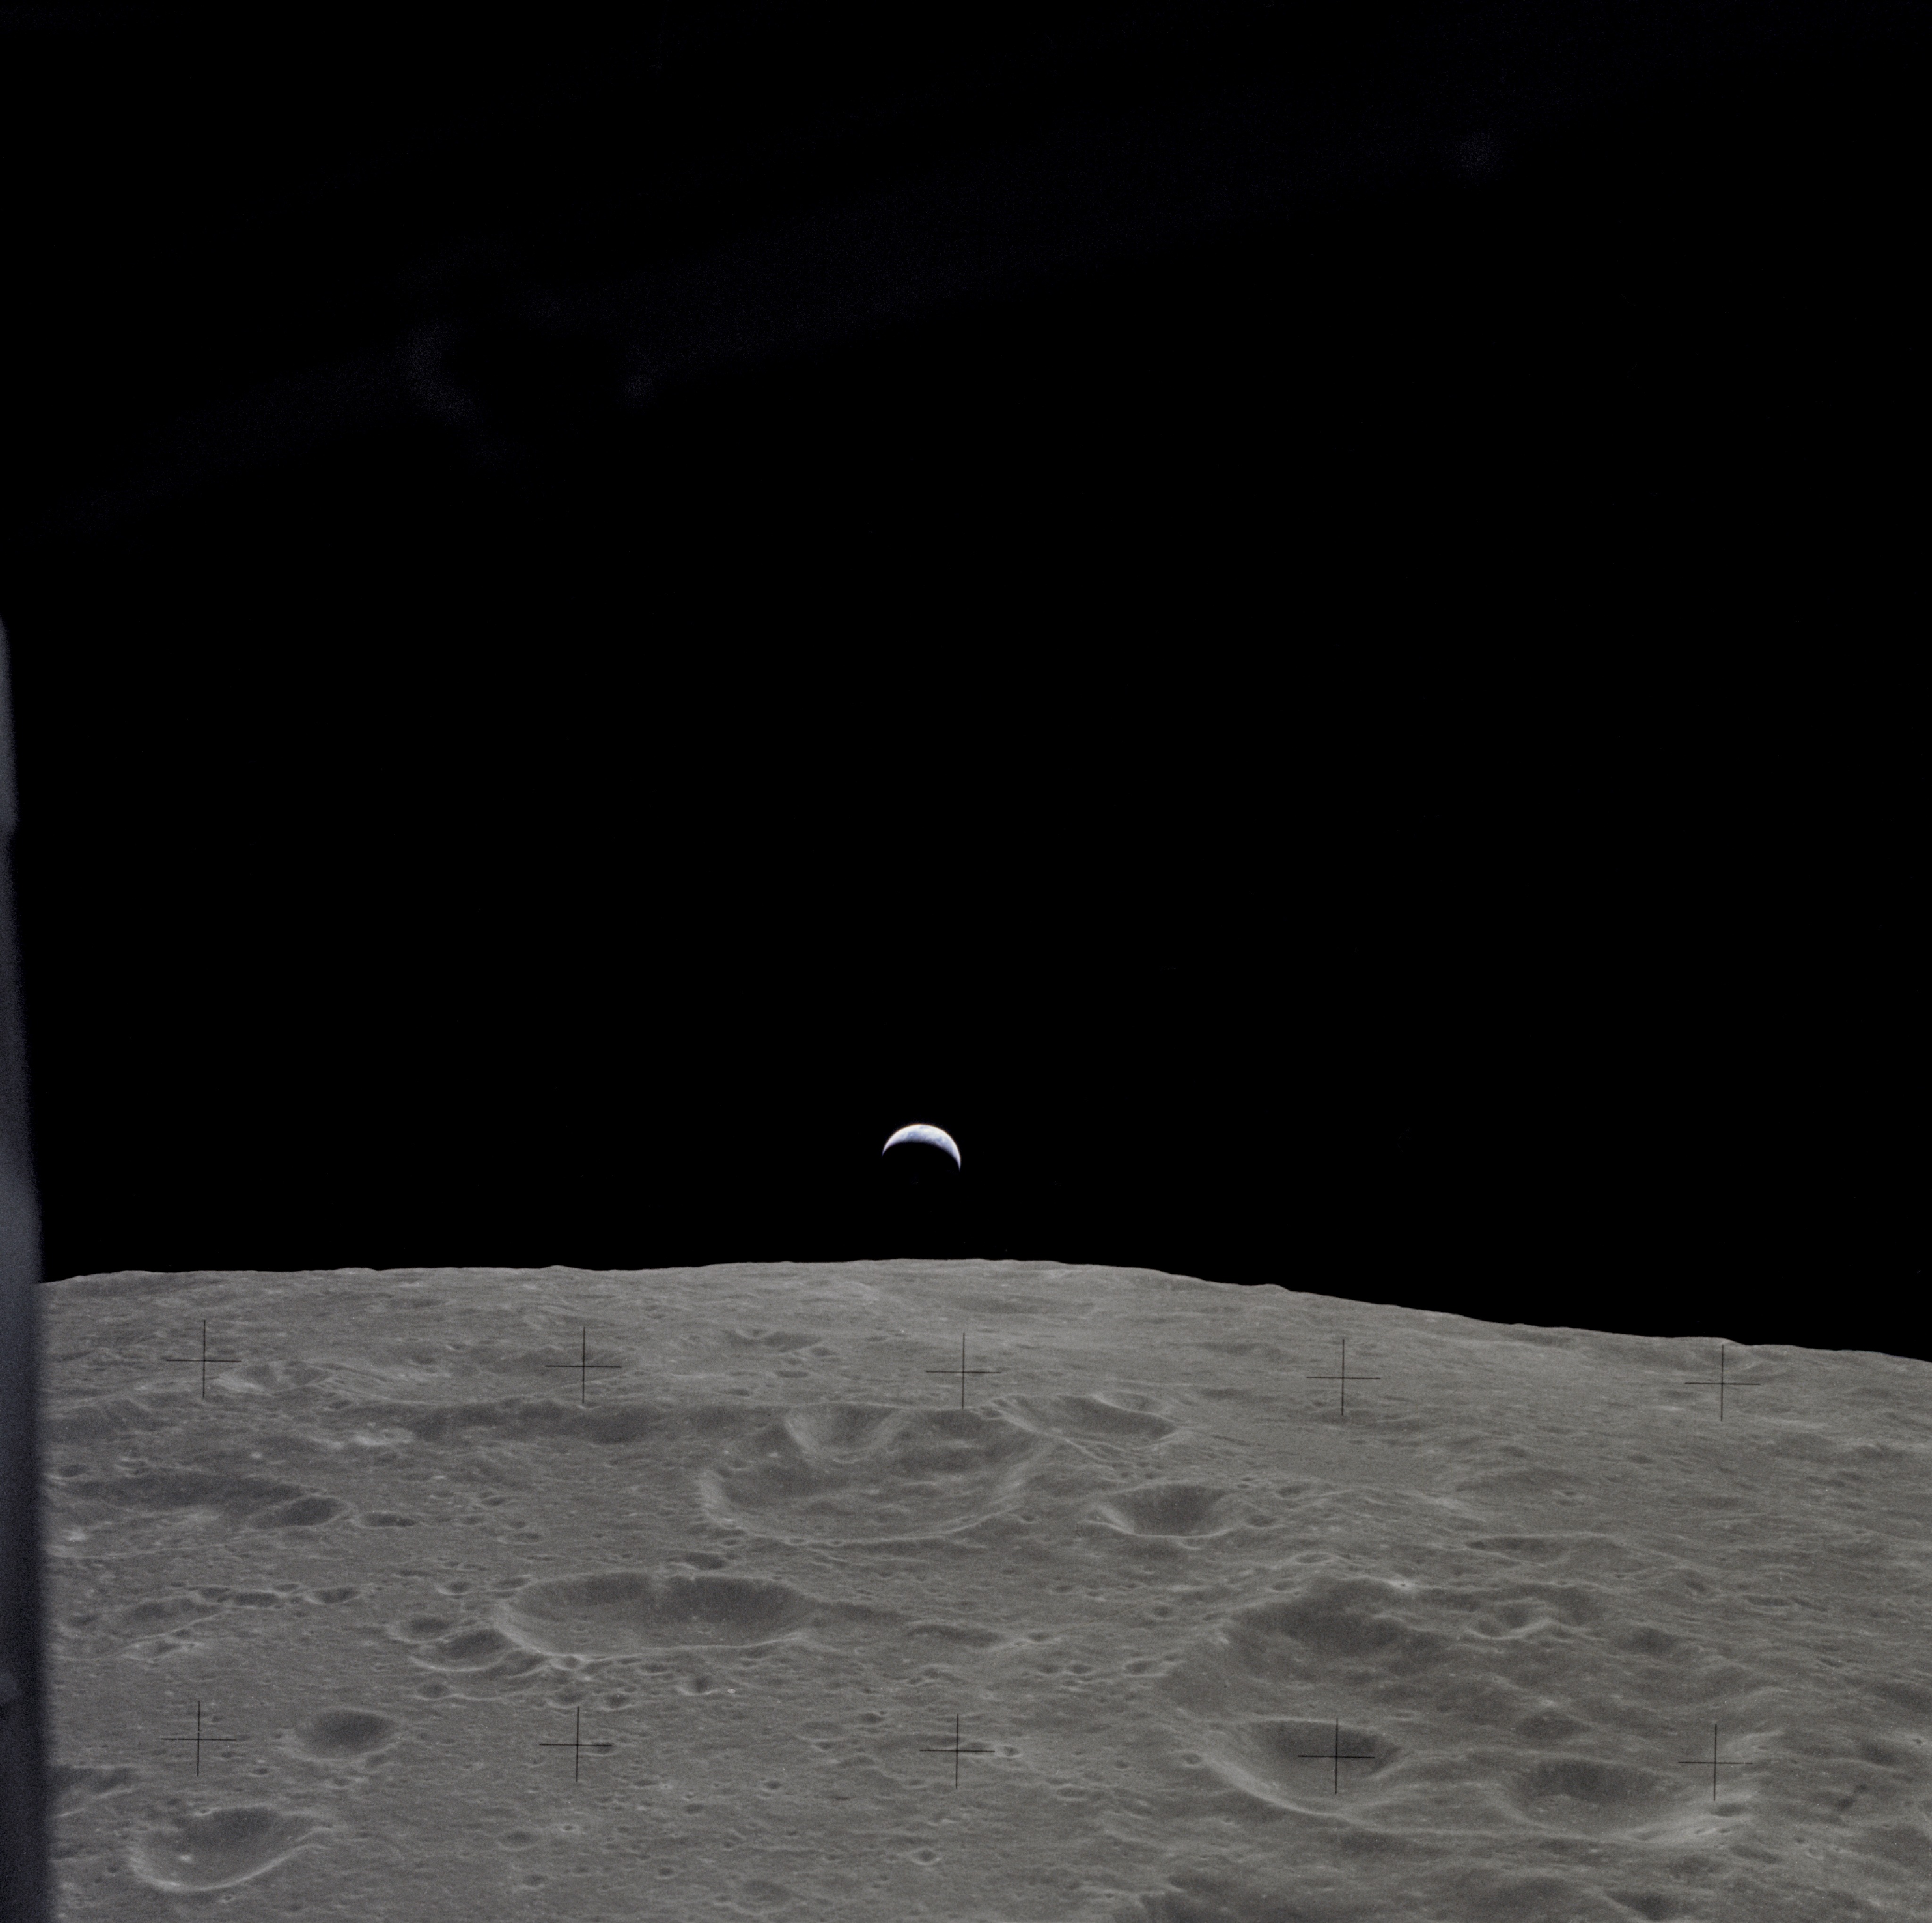 For more than four decades, this view of the Home Planet from behind the limb of the Moon has remained unseen by human eyes. Now, perhaps more than ever, the question remains: When will we go back? Photo Credit: NASA